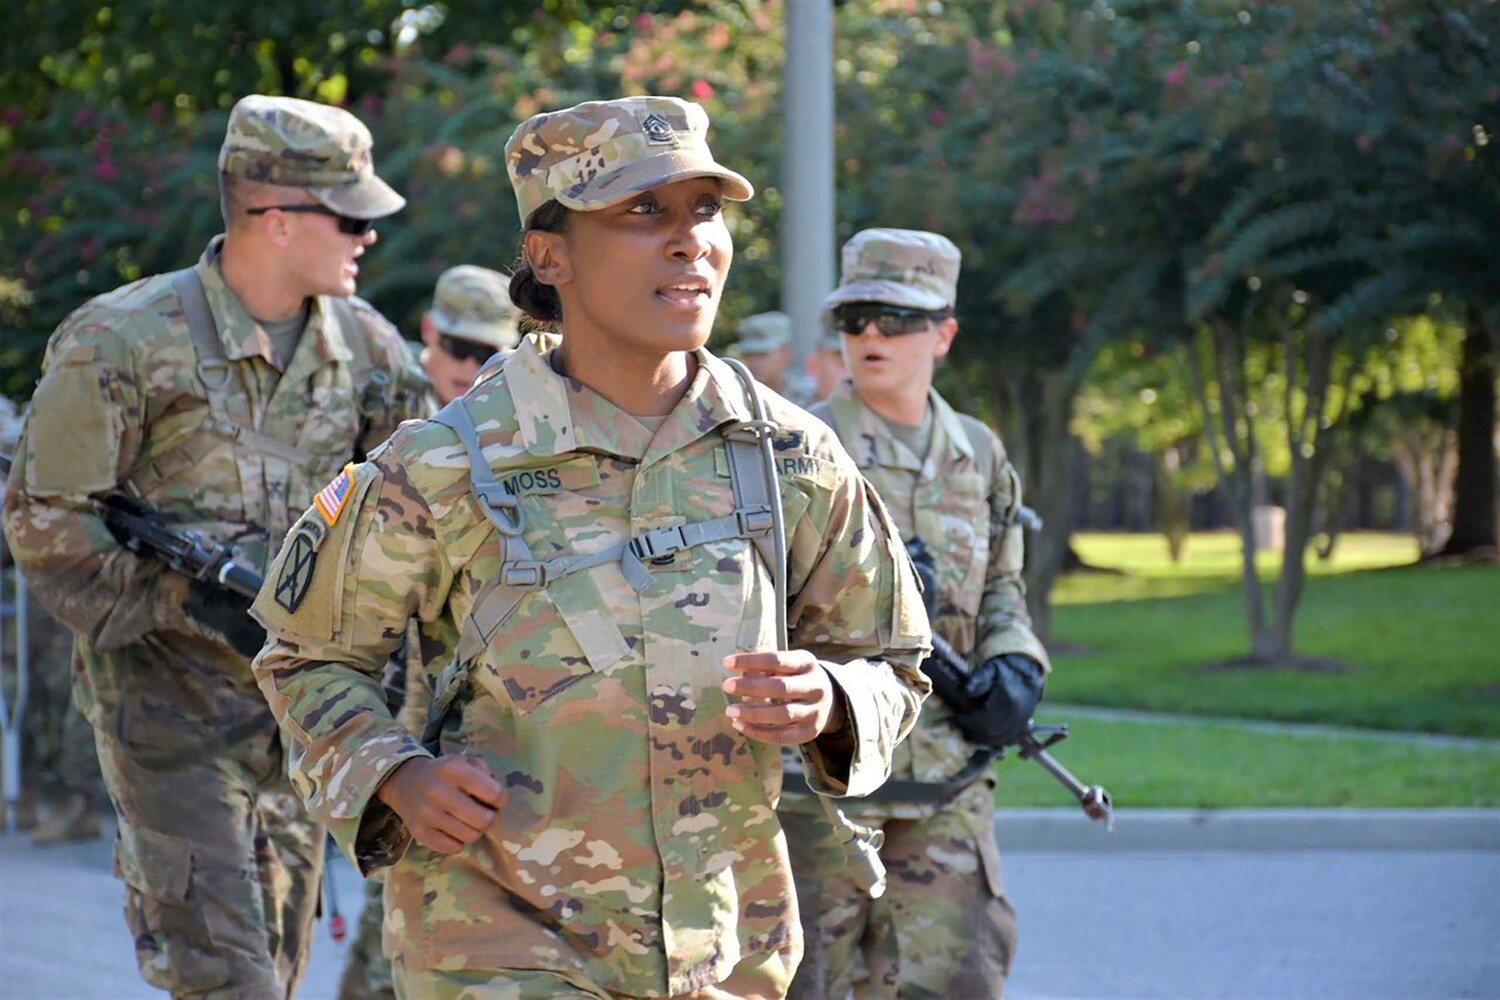 Carlandra "CT" Moss, now retired, served 24 years in the Army. As a service member of color, she said she often had to make tough decisions, weighing the best interests of her family against her military career. Photo: Anthony Bell / Fort Lee Traveller